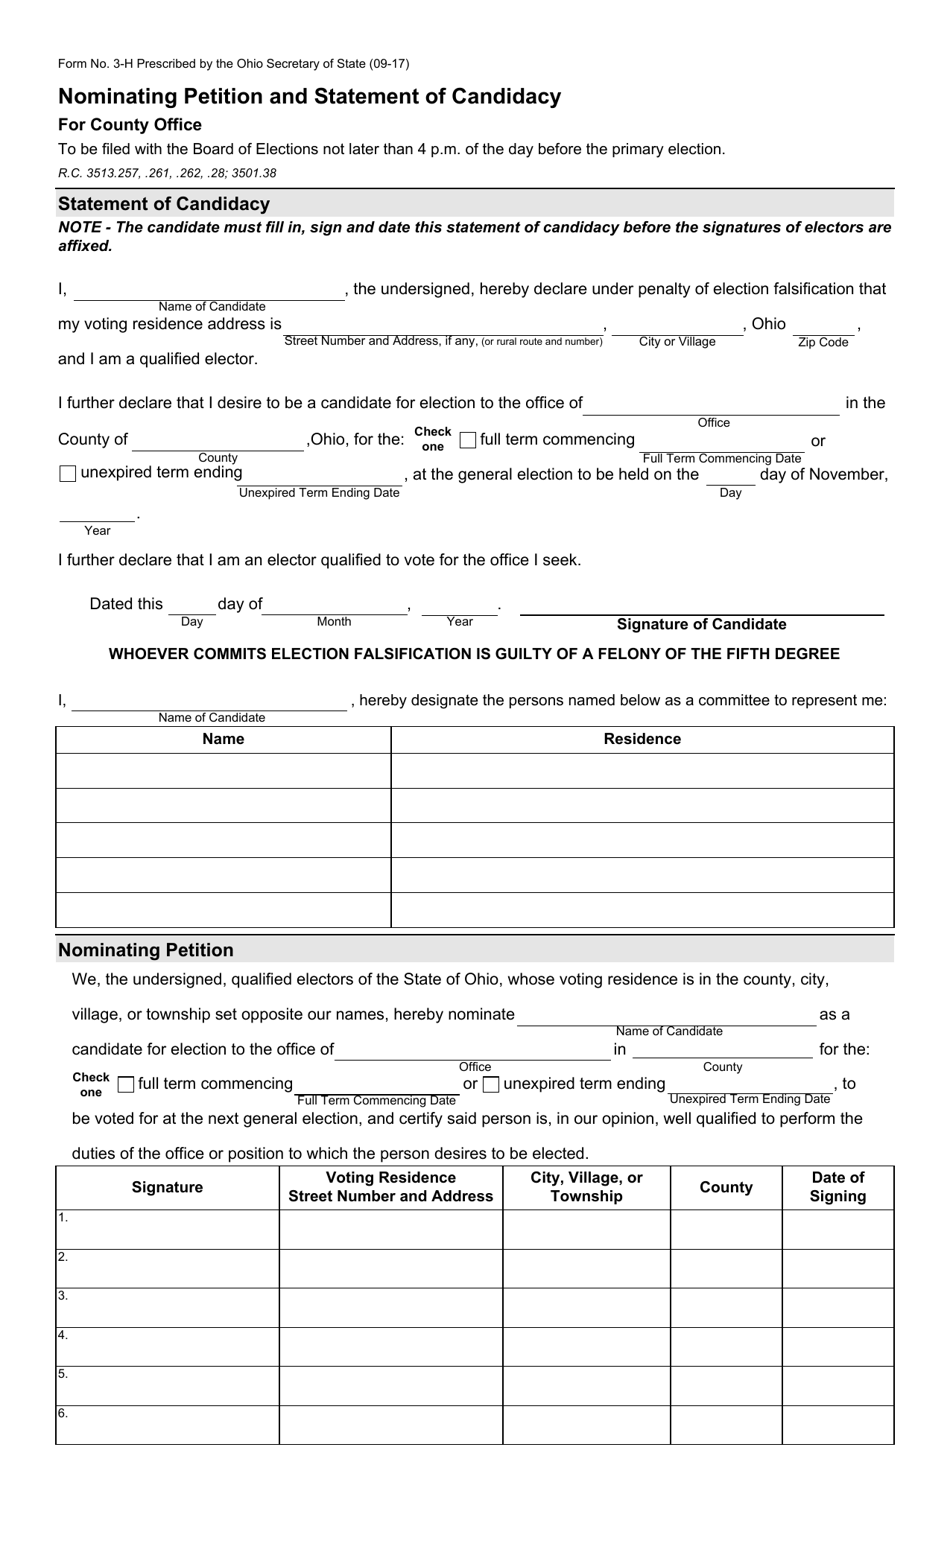 Form 3-H Nominating Petition and Statement of Candidacy for County Office - Ohio, Page 1